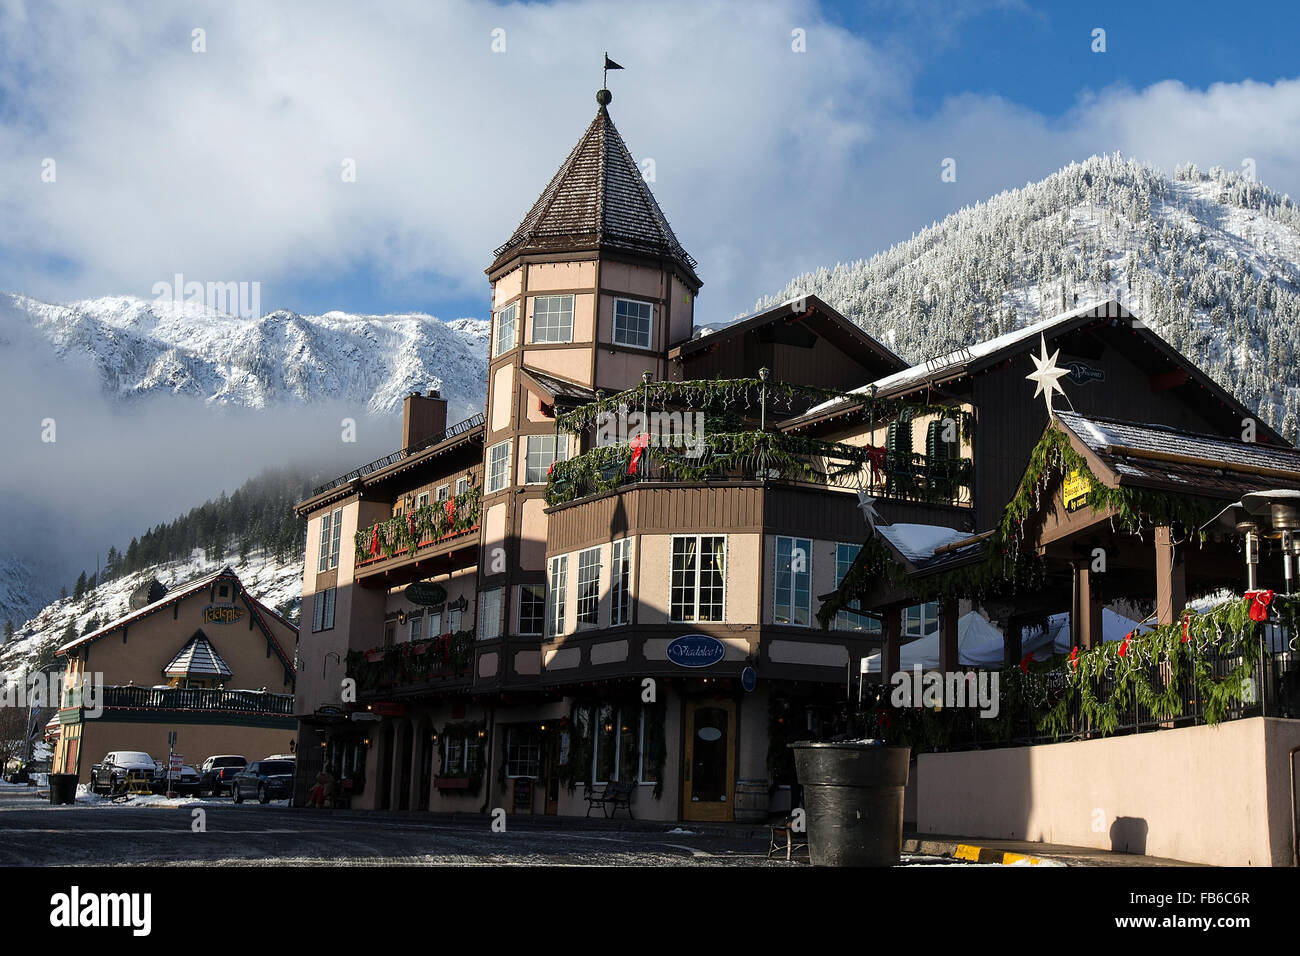 Bavarian building with snow covered mountains, Leavenworth, Washington, United States of America Stock Photo